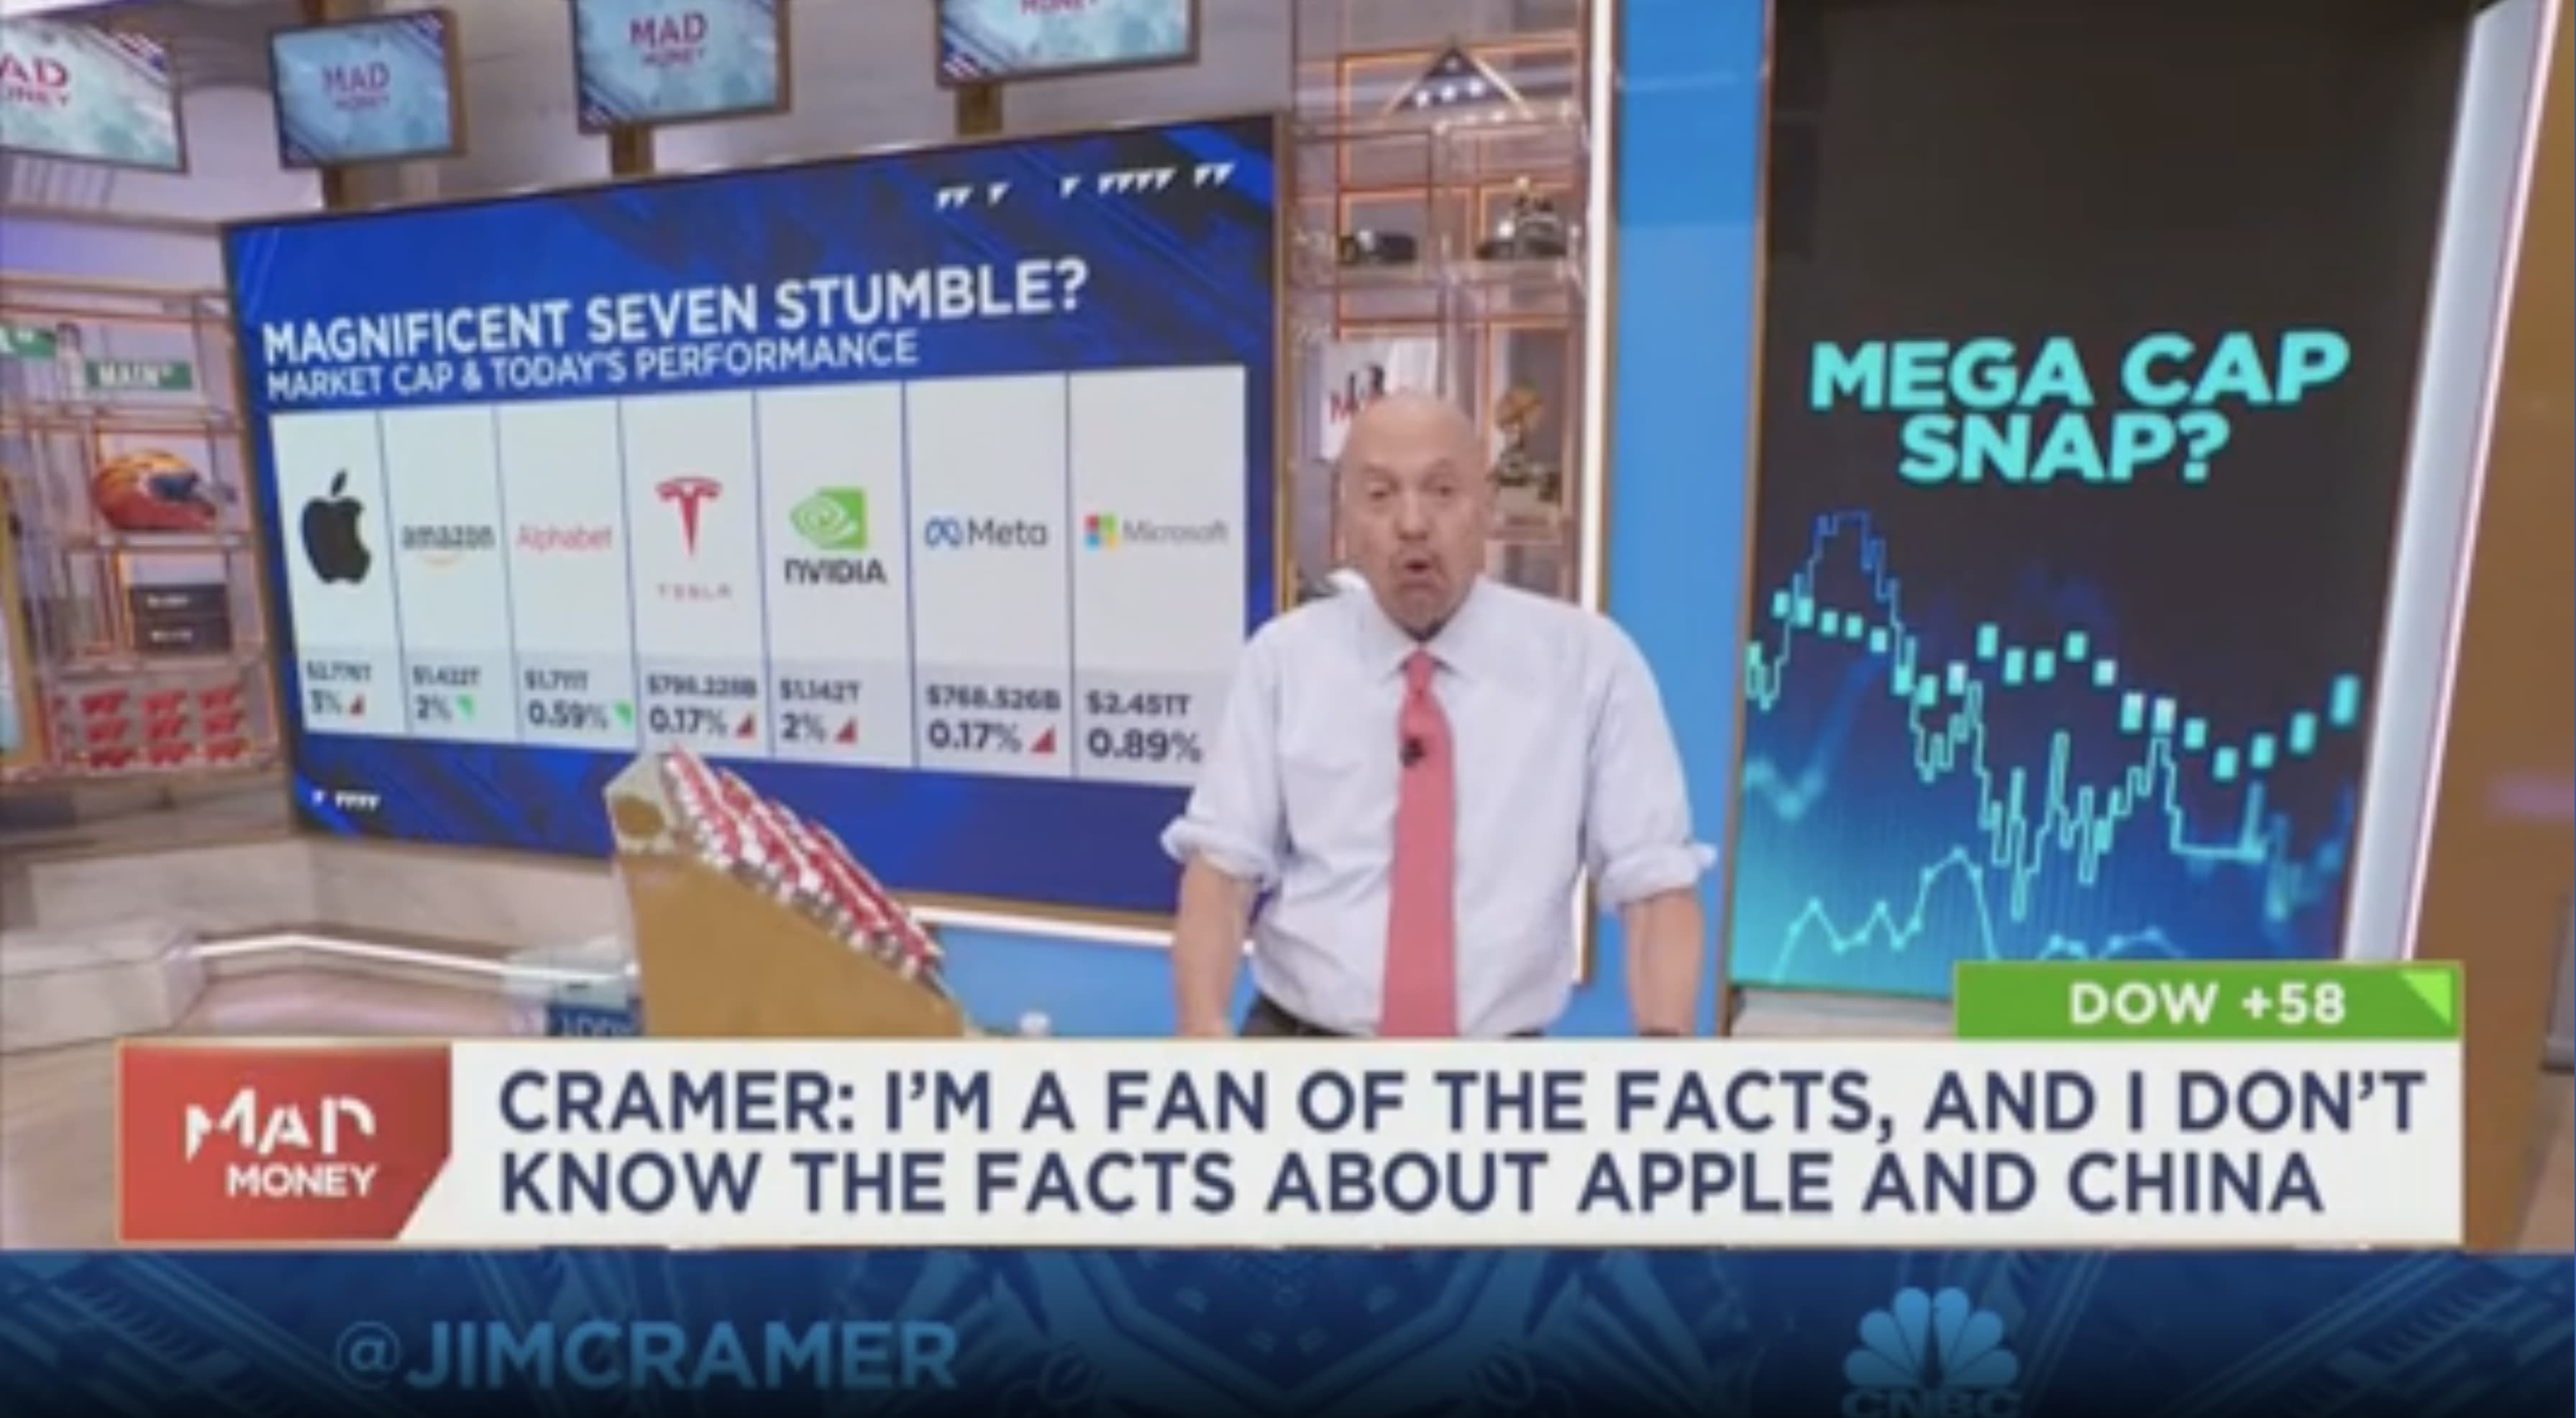 I'm a fan of the facts, and I don't know the facts about Apple and China, says Jim Cramer